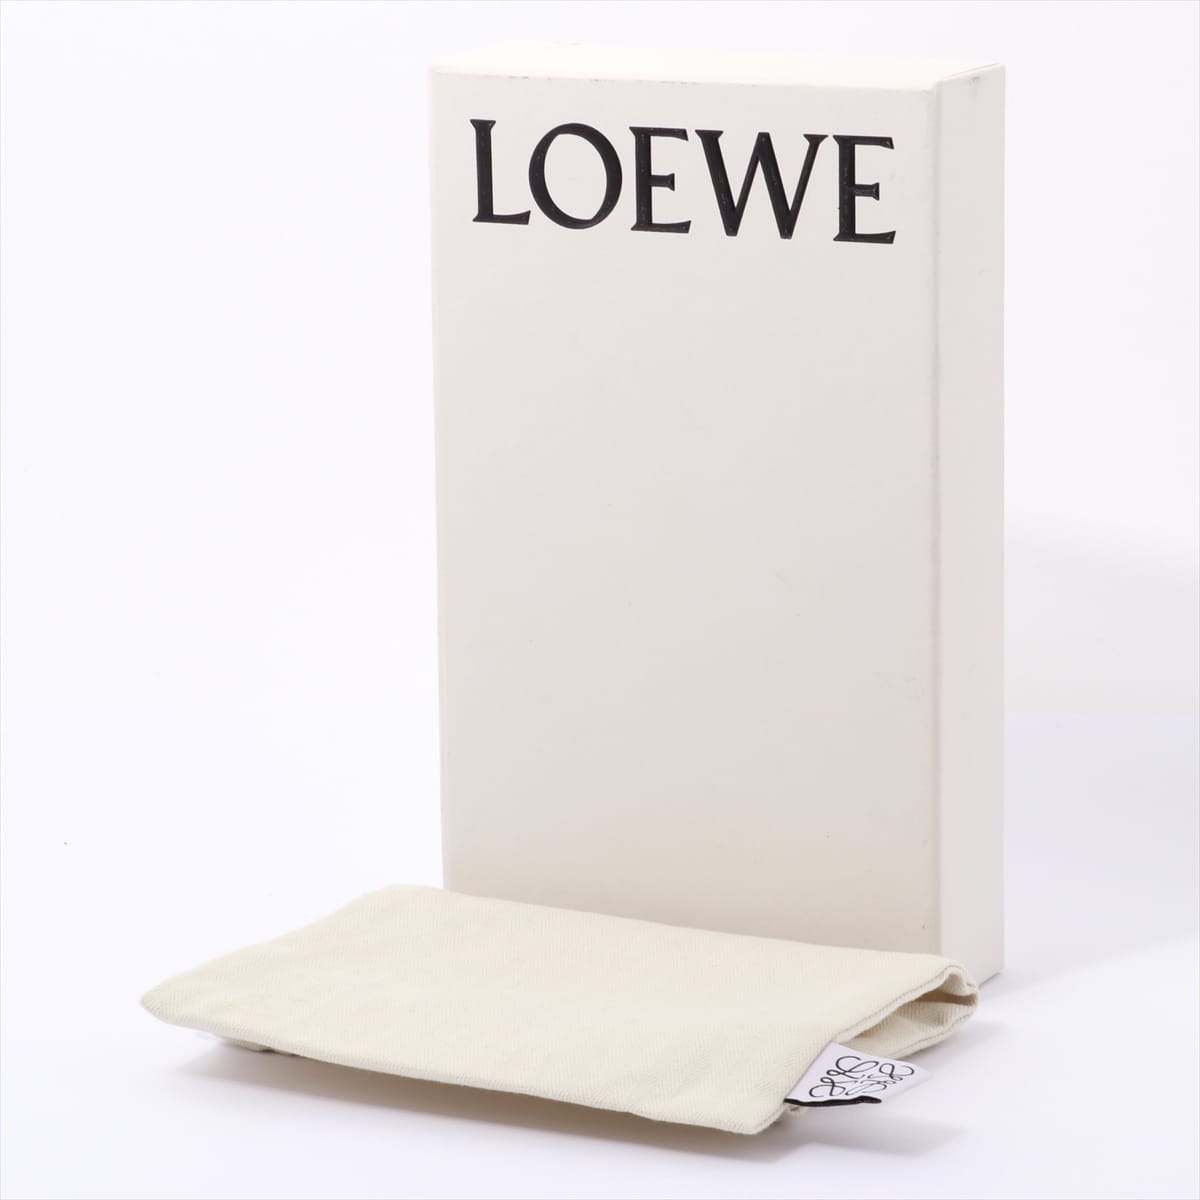 Loewe Charm Leather Navy blue Brown box Comes with storage bag Anagram